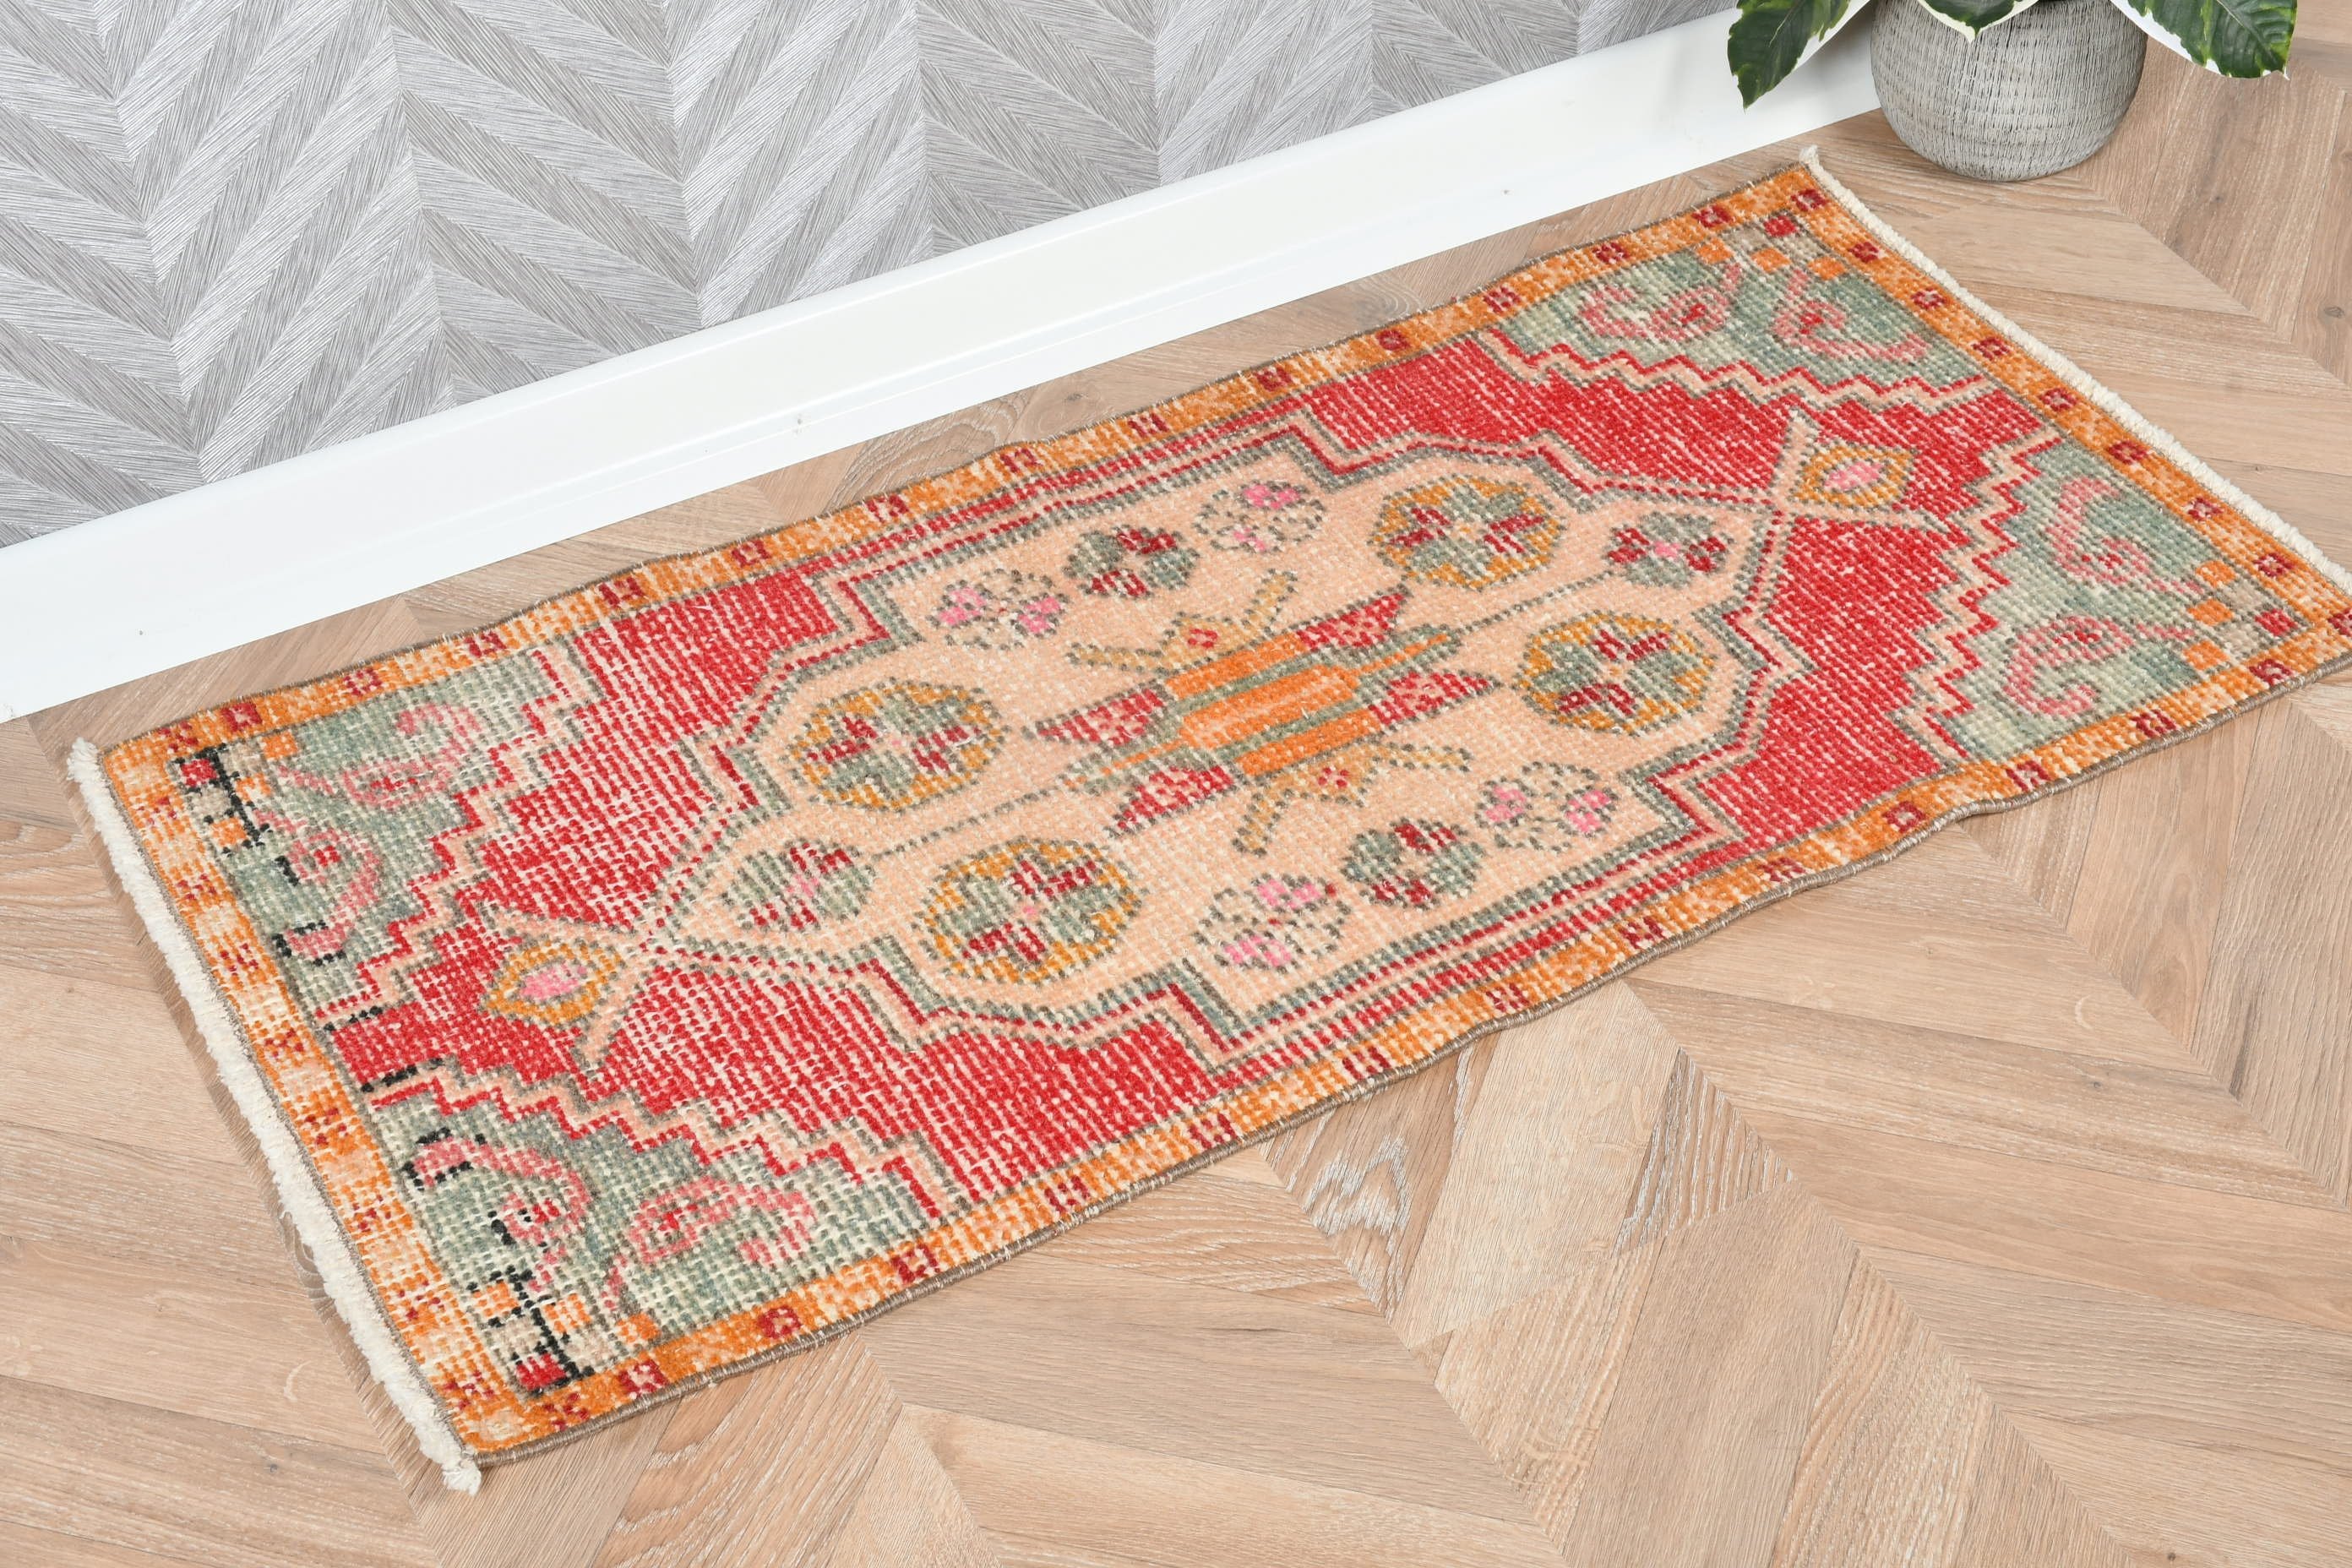 Floor Rugs, Art Rugs, Oushak Rugs, Turkish Rug, Rugs for Kitchen, Wall Hanging Rug, Red Kitchen Rugs, Vintage Rugs, 1.6x3.3 ft Small Rug